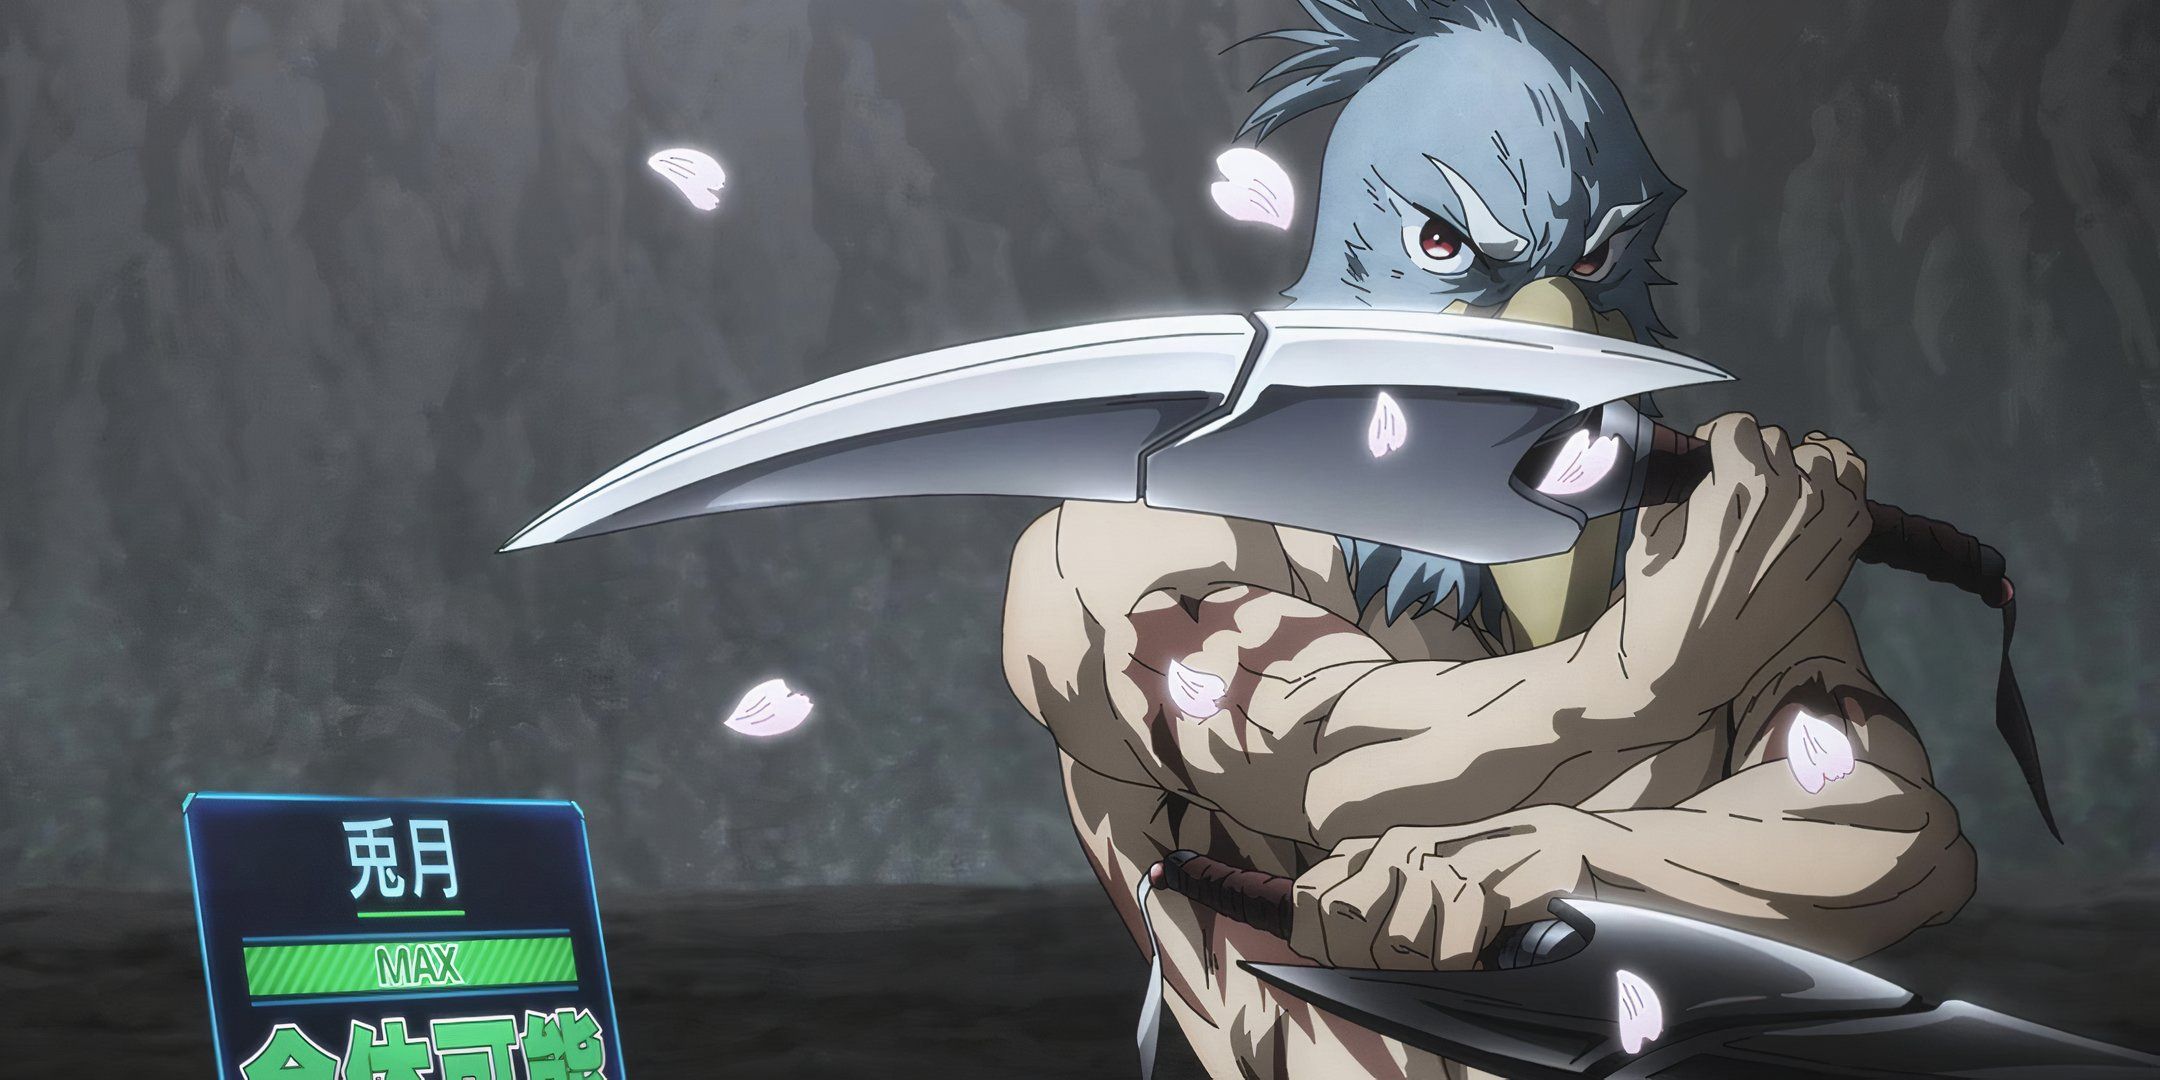 Sunraku holds two blades, beside him a screen is maxed out.